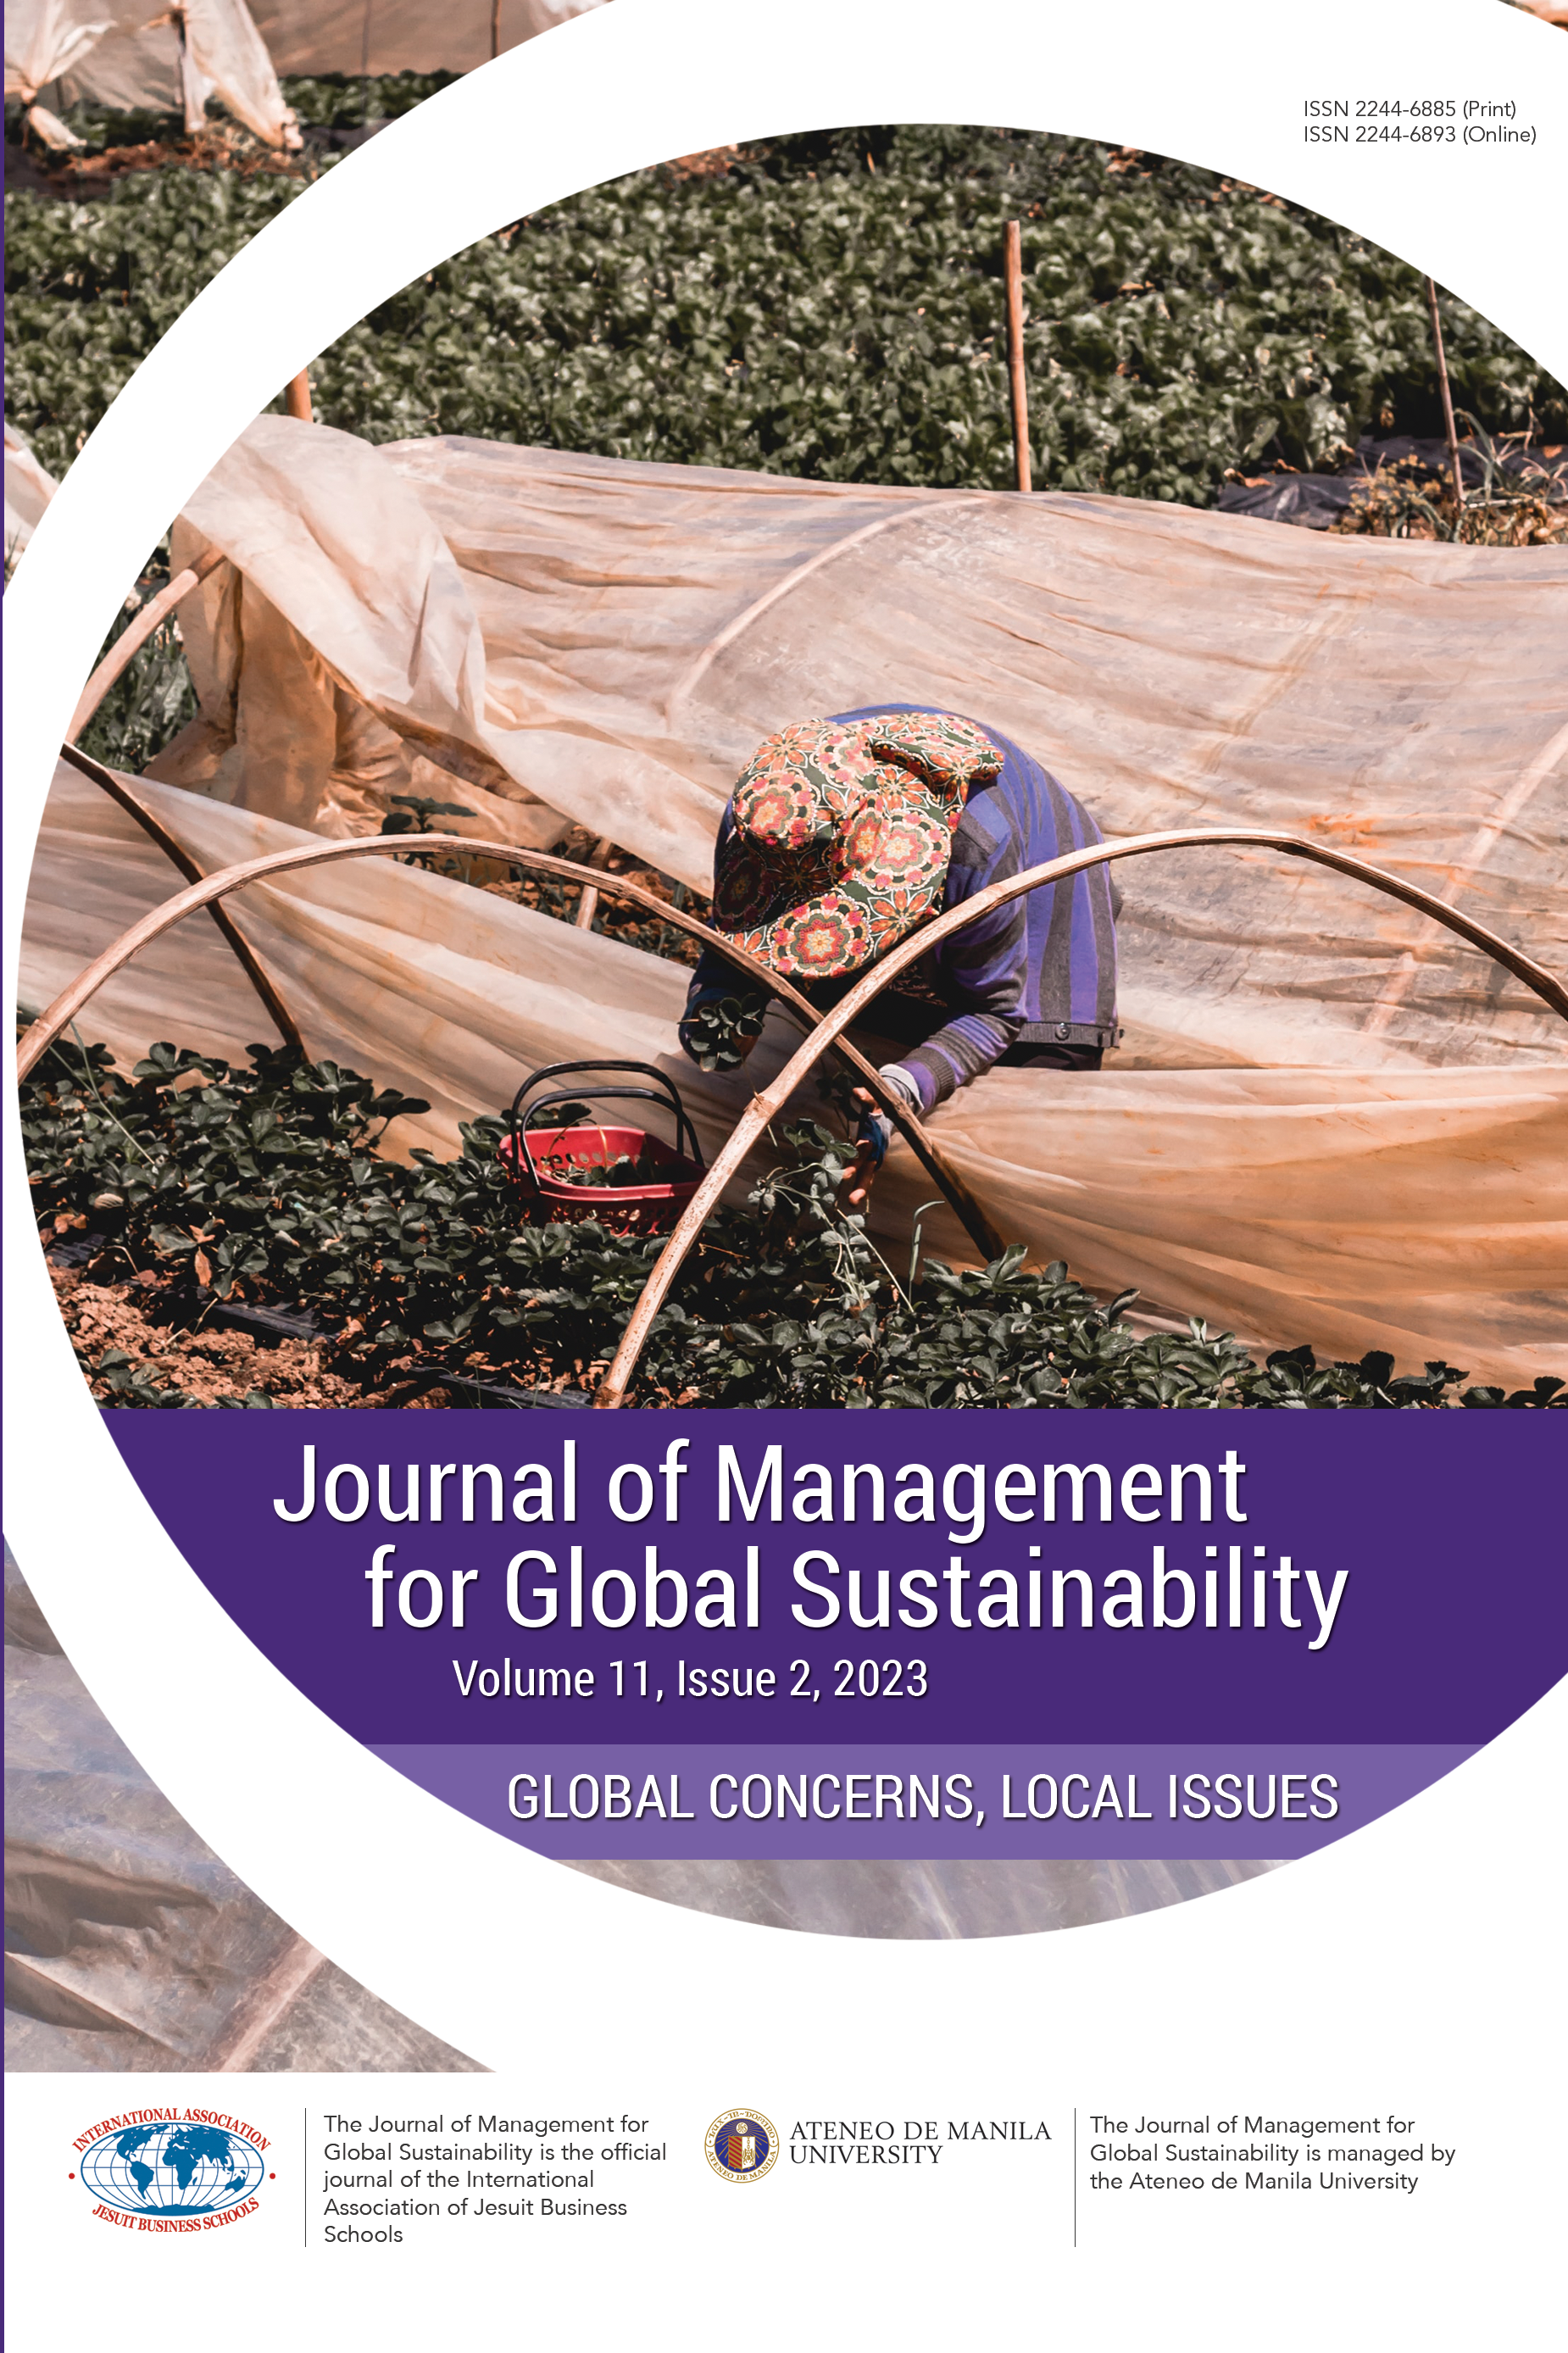 Journal of Management for Global Sustainability Image